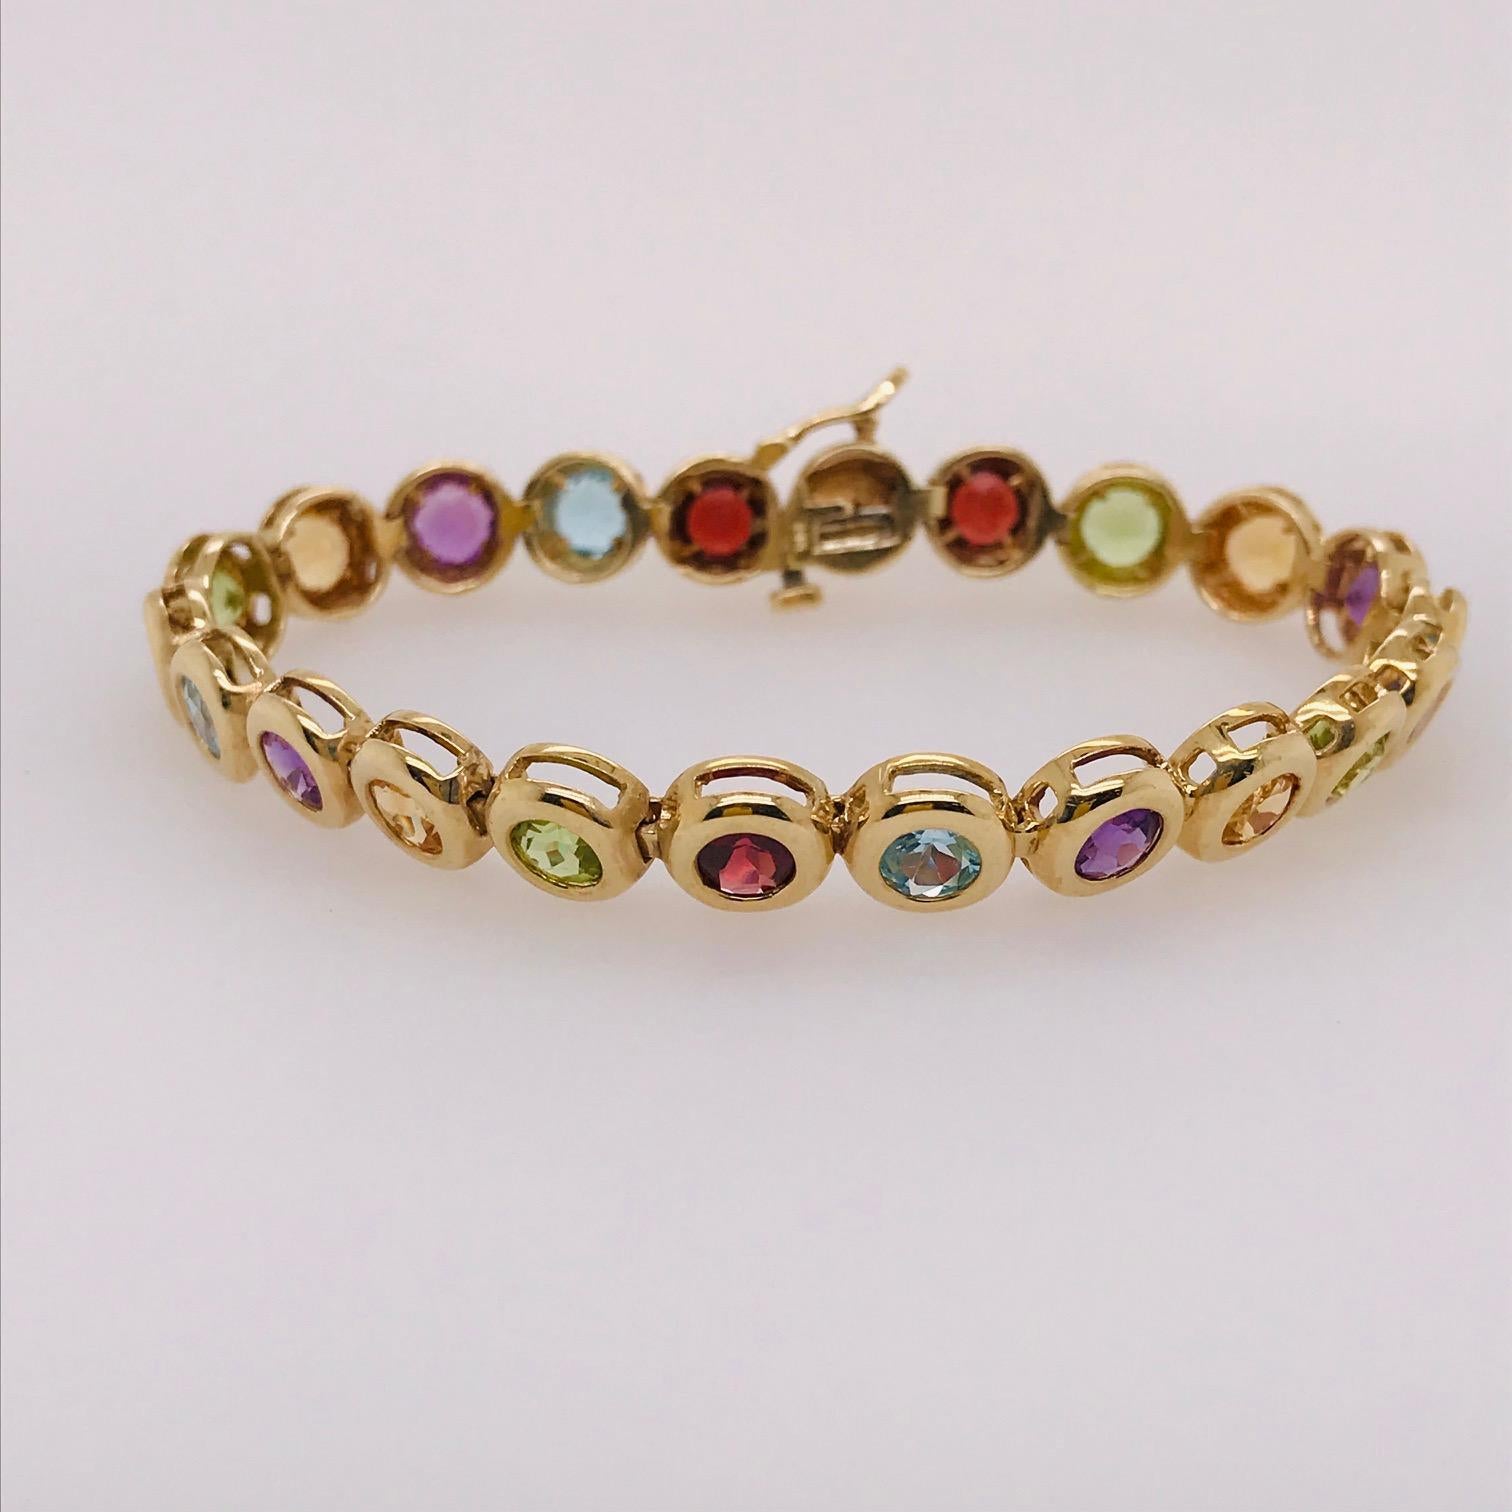 This fun, retro, one of a kind bracelet is so adorable! With genuine gemstones going around the bracelet set in a retro bezel design. The bracelet is 14k yellow gold and 7 inches long. The alternation gemstones are genuine Amethyst, aquamarine,